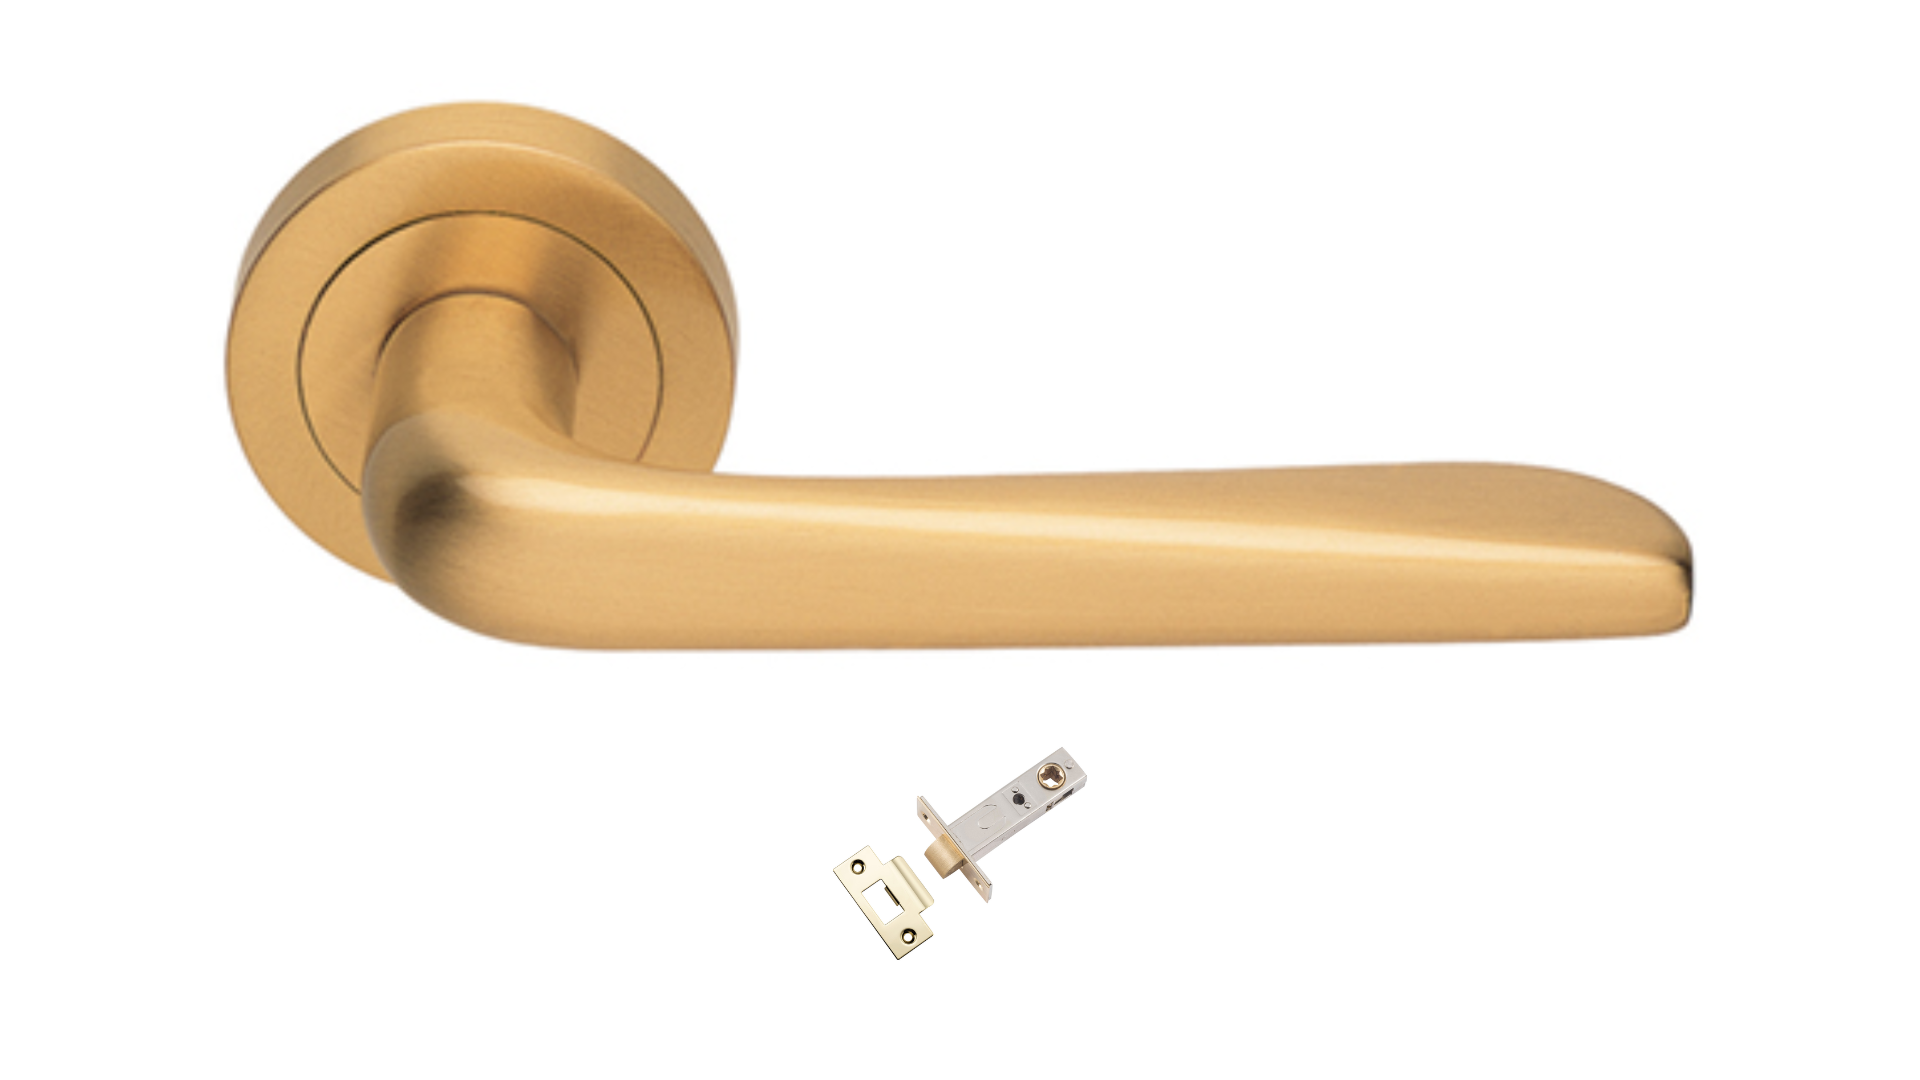 Product picture of the Petra Satin Brass Door Handle with separate tubular latch on a white background.